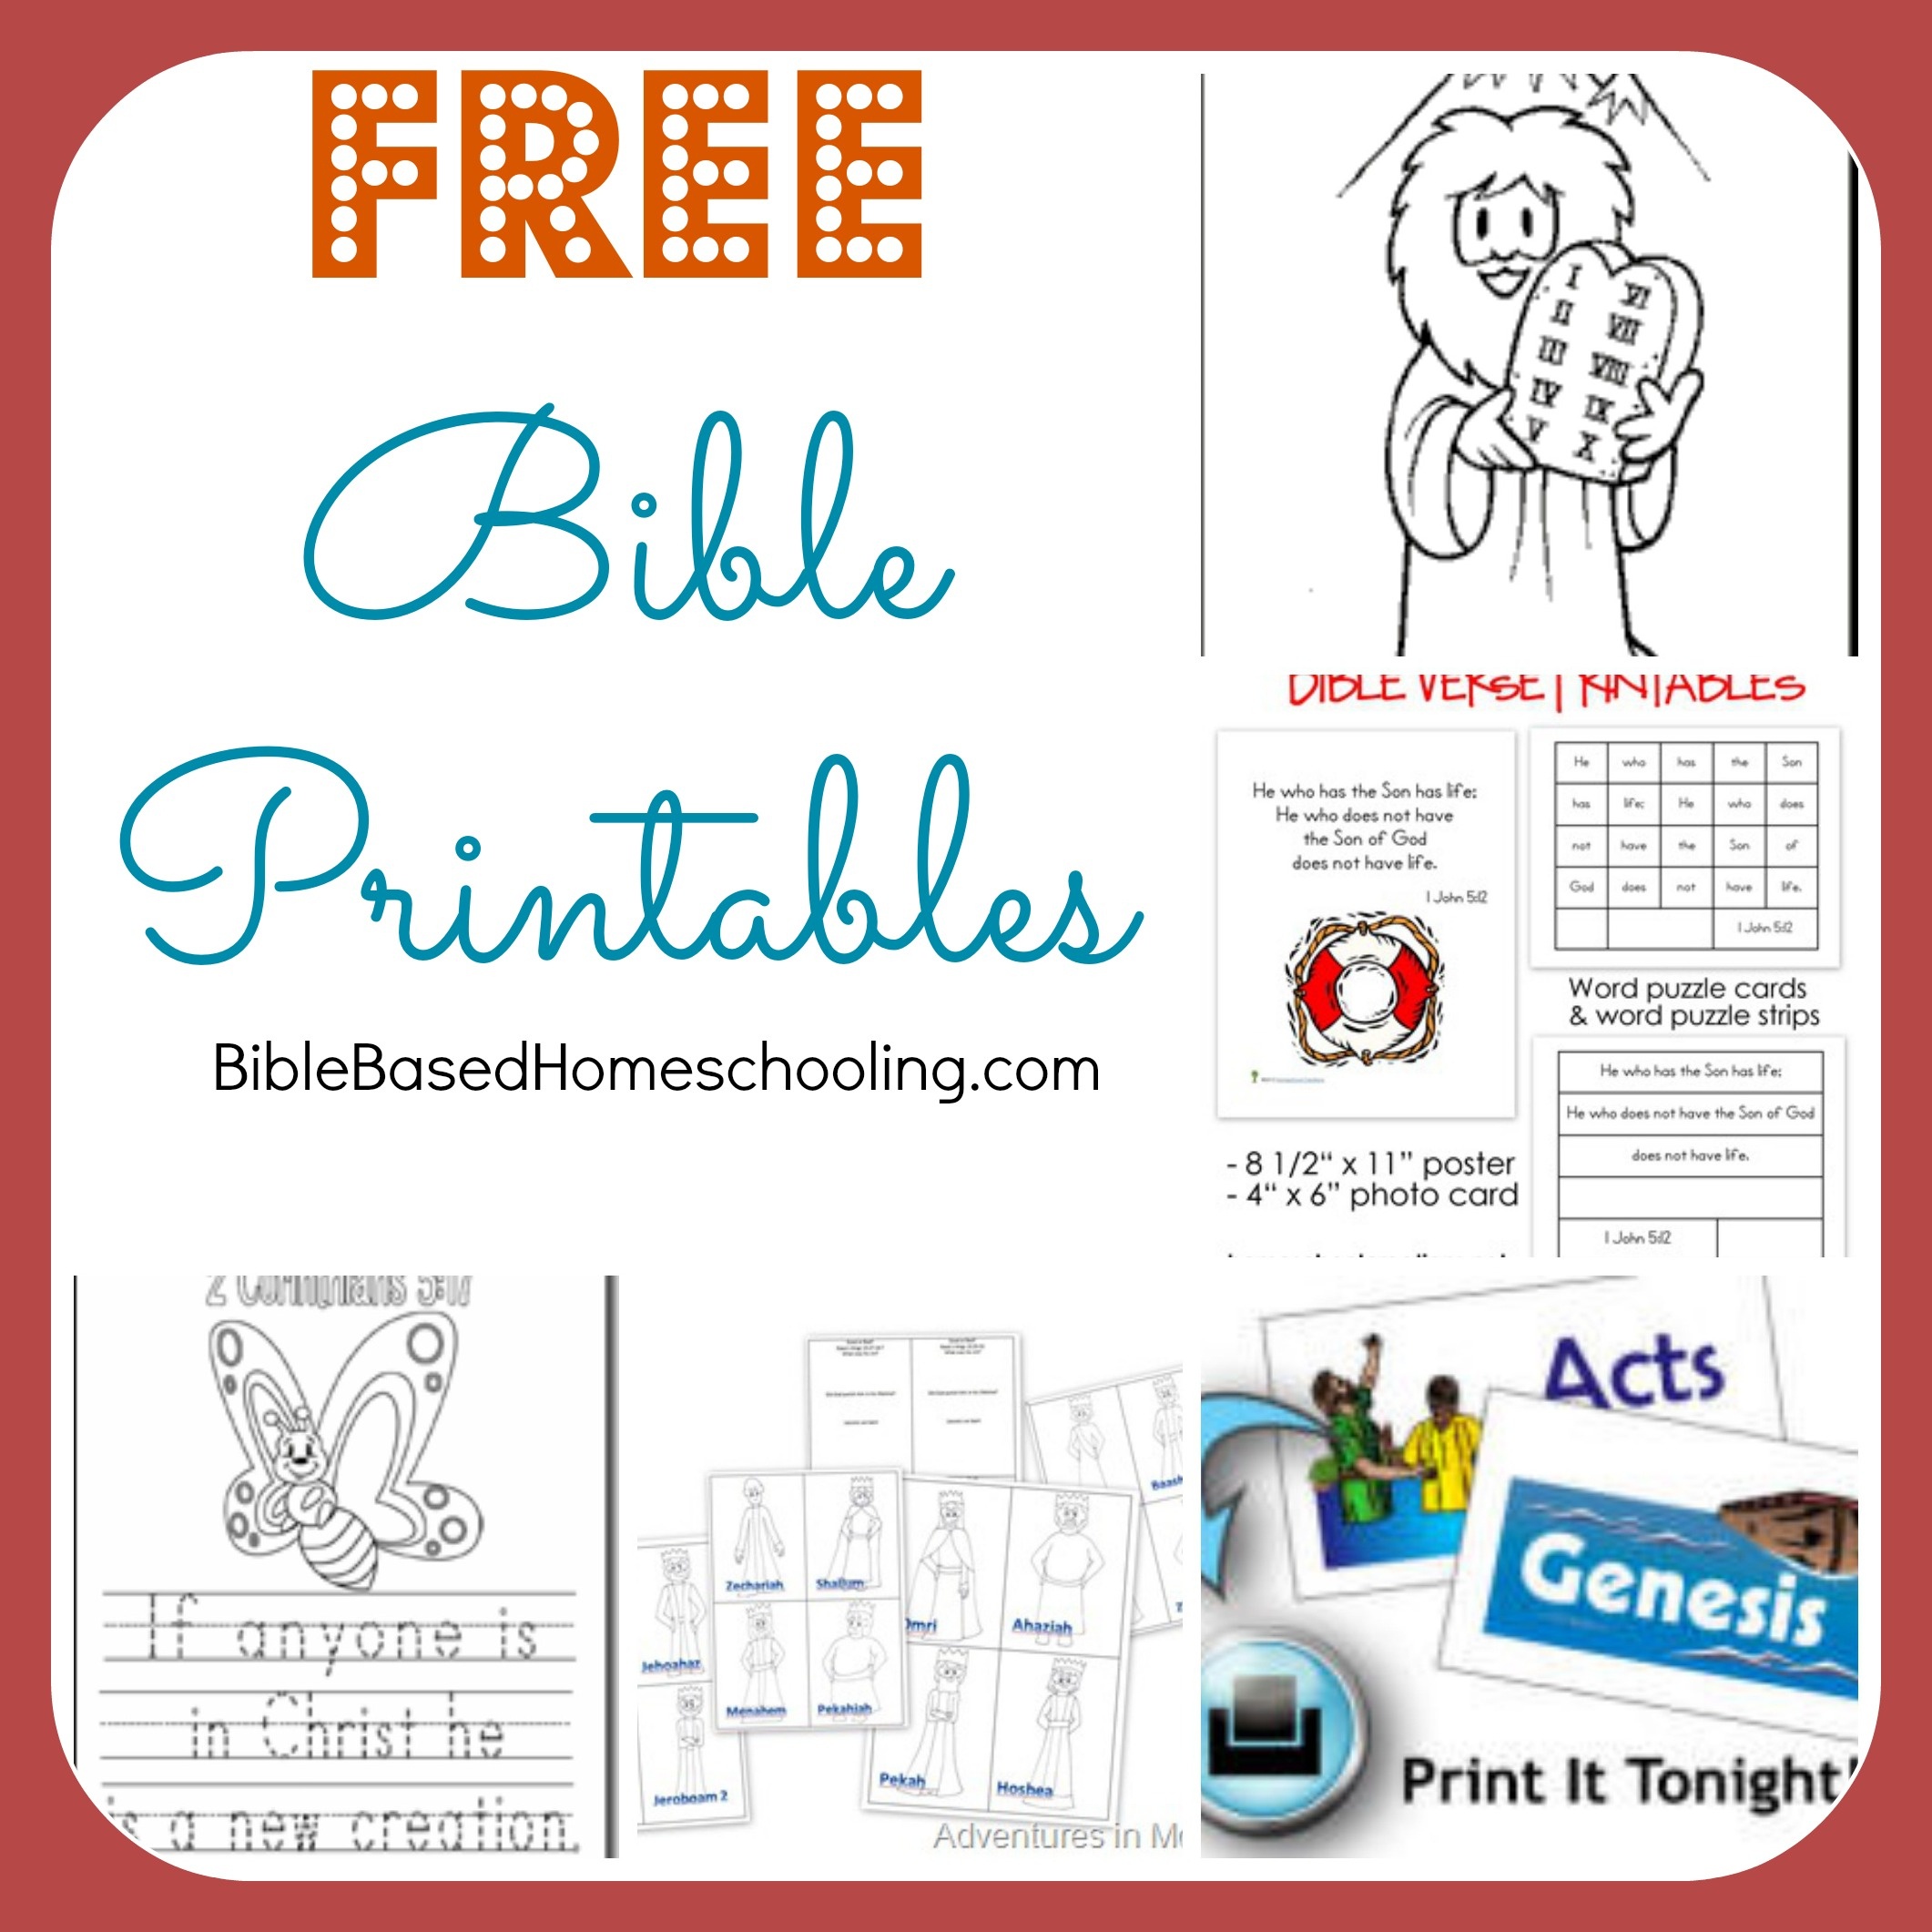 Free Printable Bible Games (87+ Images In Collection) Page 2 - Free Printable Bible Games For Kids